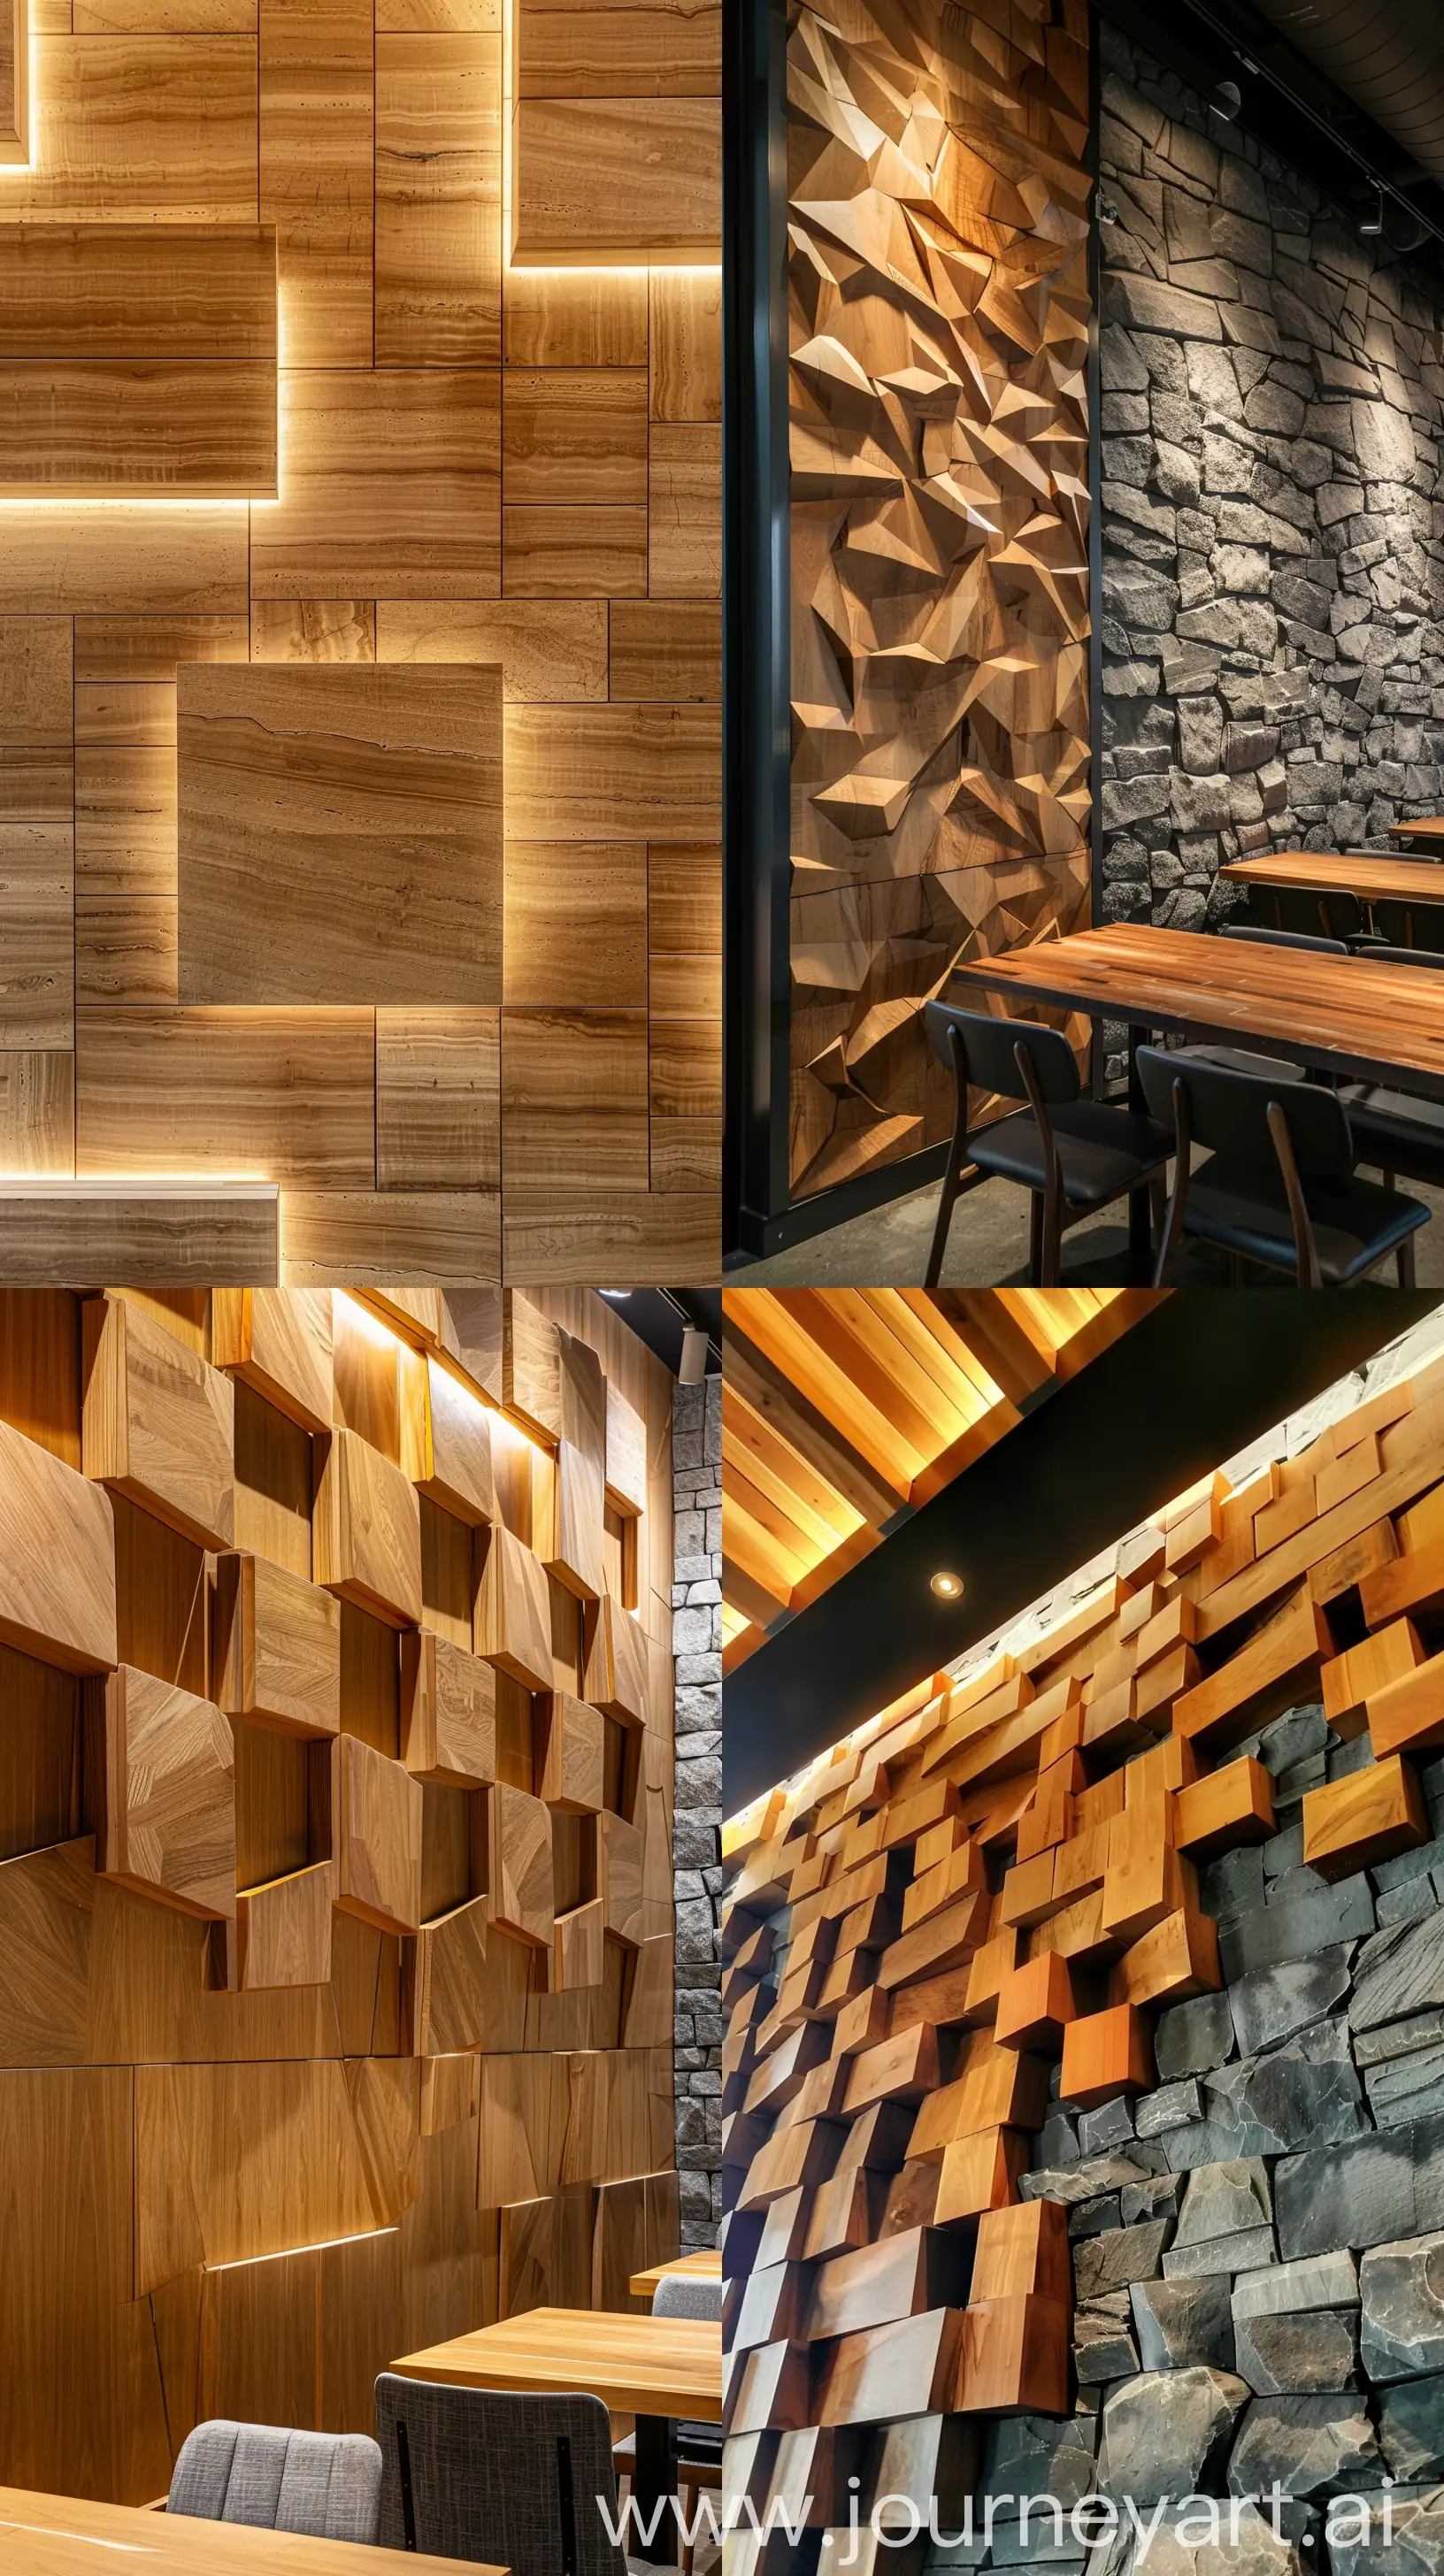 Photo of the wall of the science and technology center area designed with computational architecture, modern, wood, stone; top view horizontal close-up image in the restaurant --ar 9:16 --v 6.0